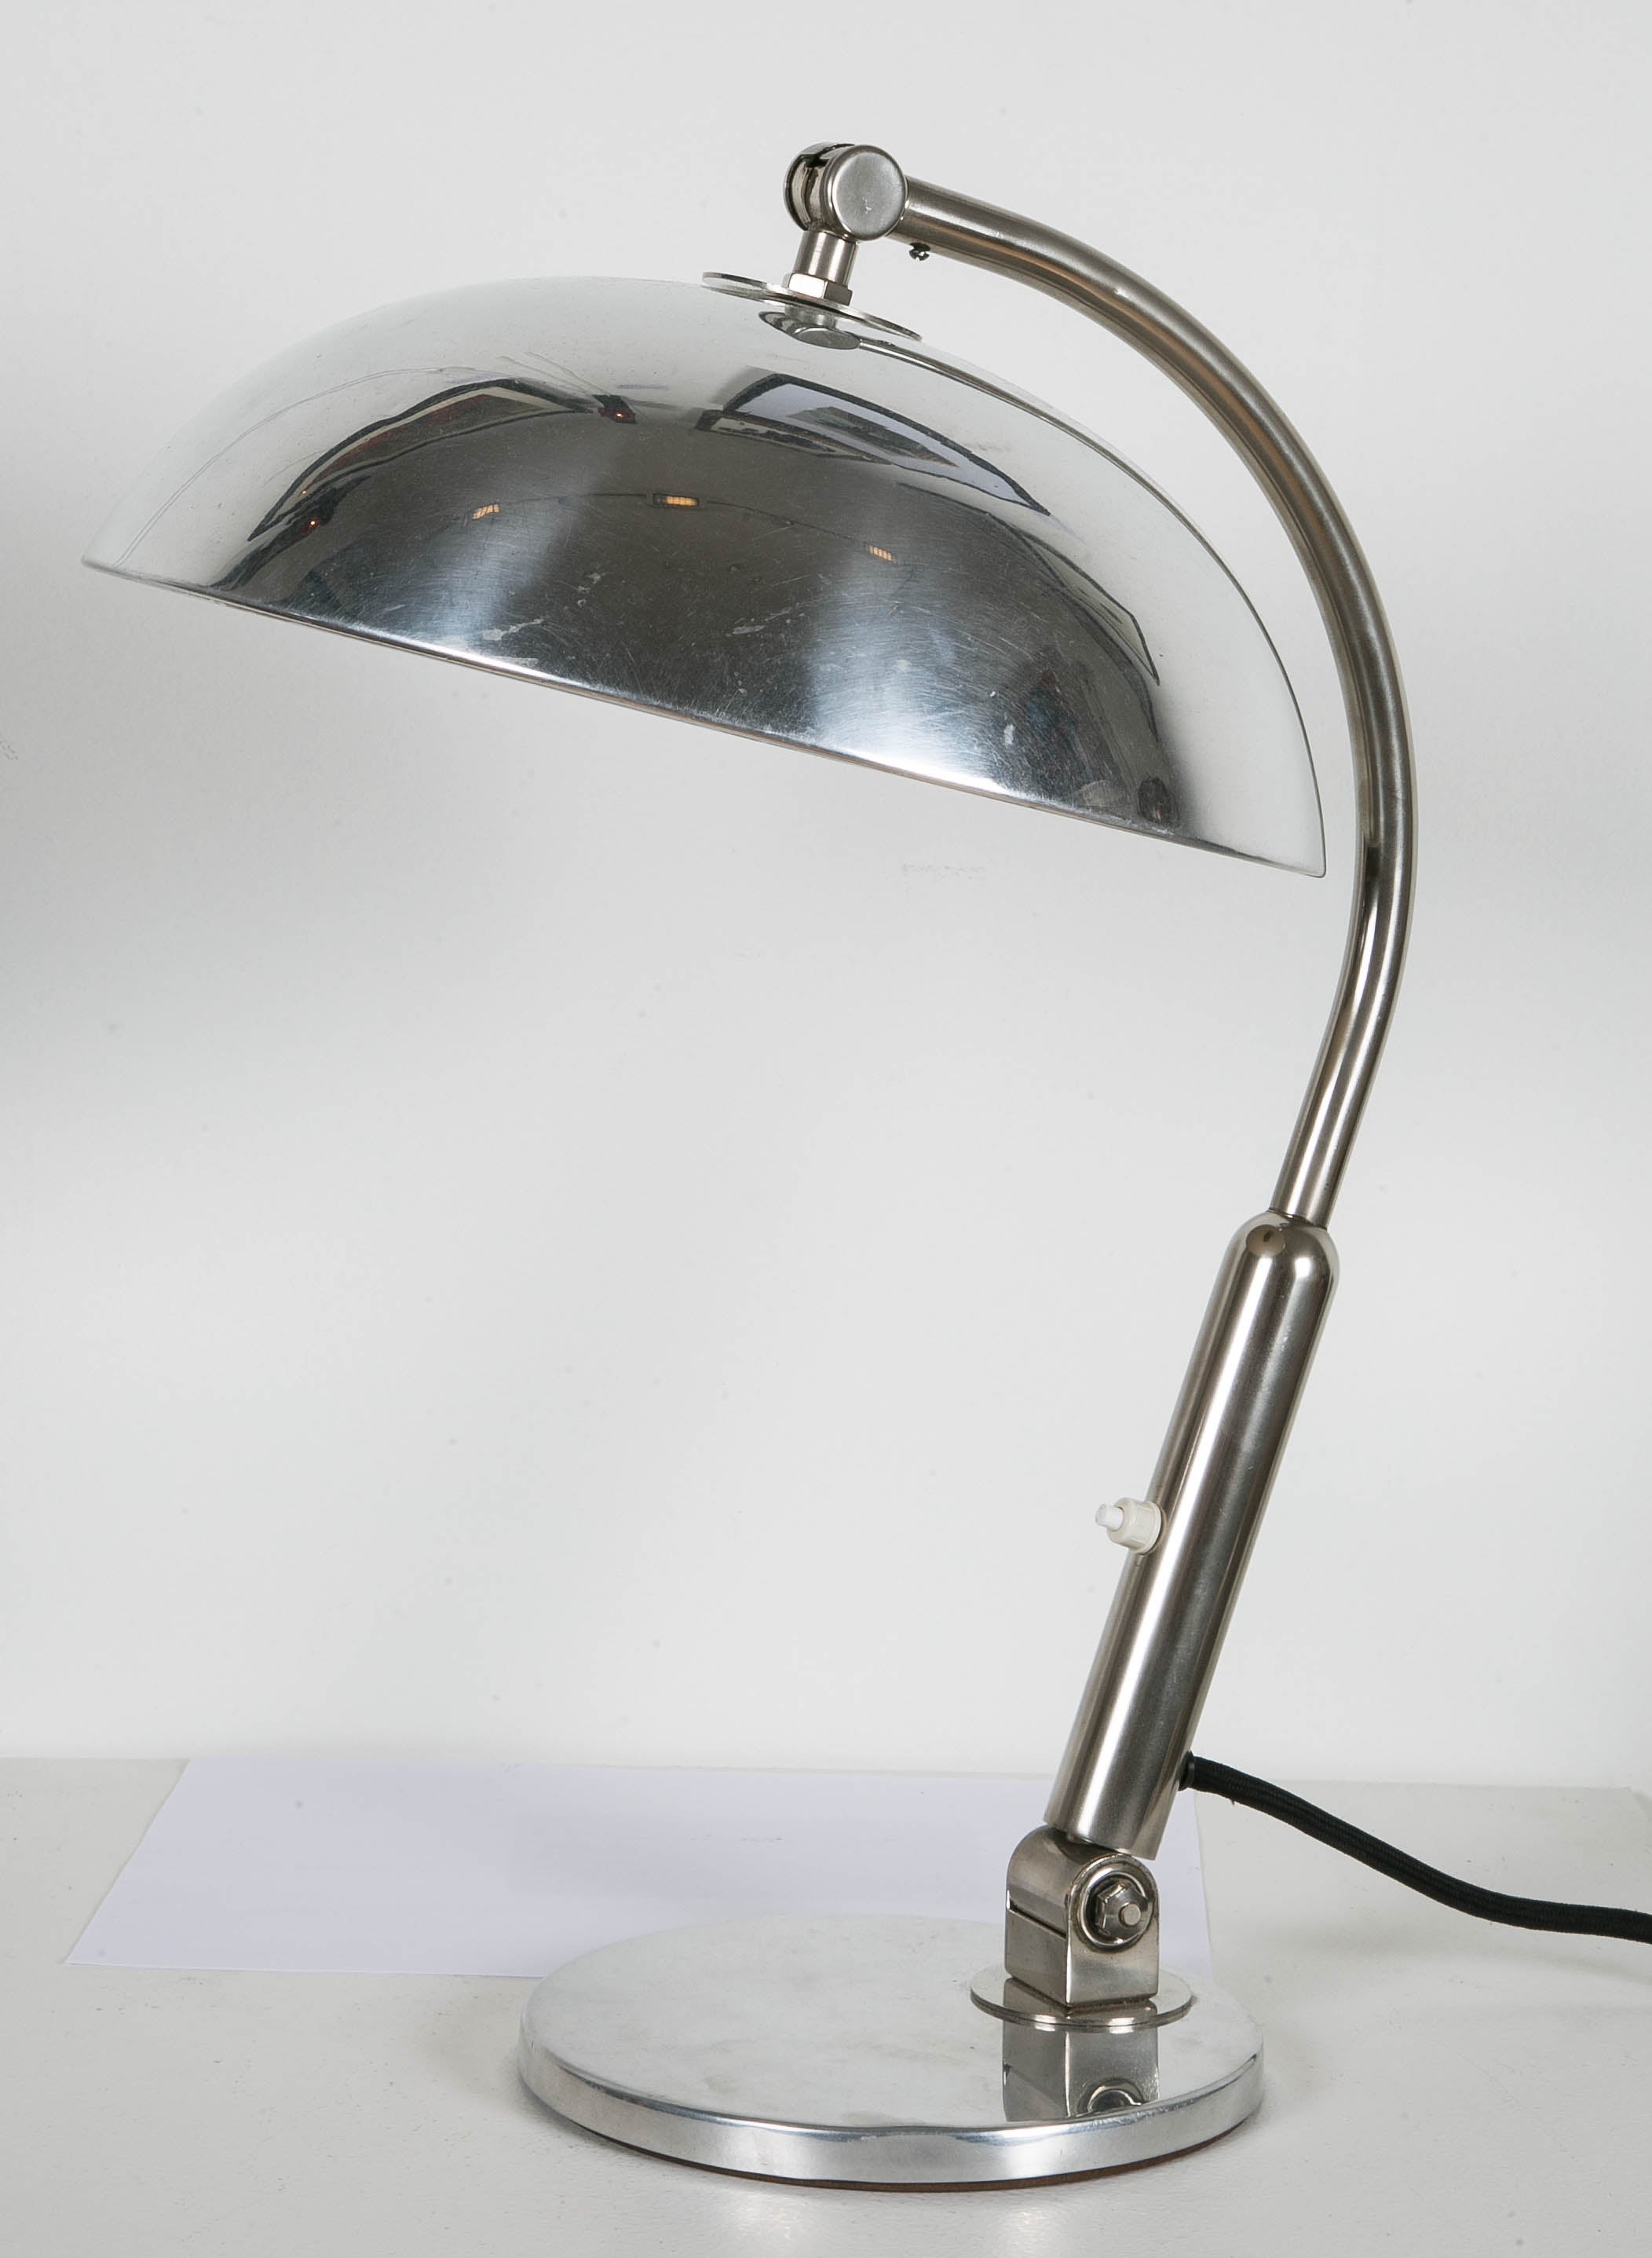 Steel table lamp with chrome steel base and aluminium shade, double articulated nickel-plated arm. This model was designed by H.TH.J.A. Busquet and edited by Hala (Hannoversche Lampenwerke), Bauhaus, circa 1935. Beautiful example of timeless Bauhaus